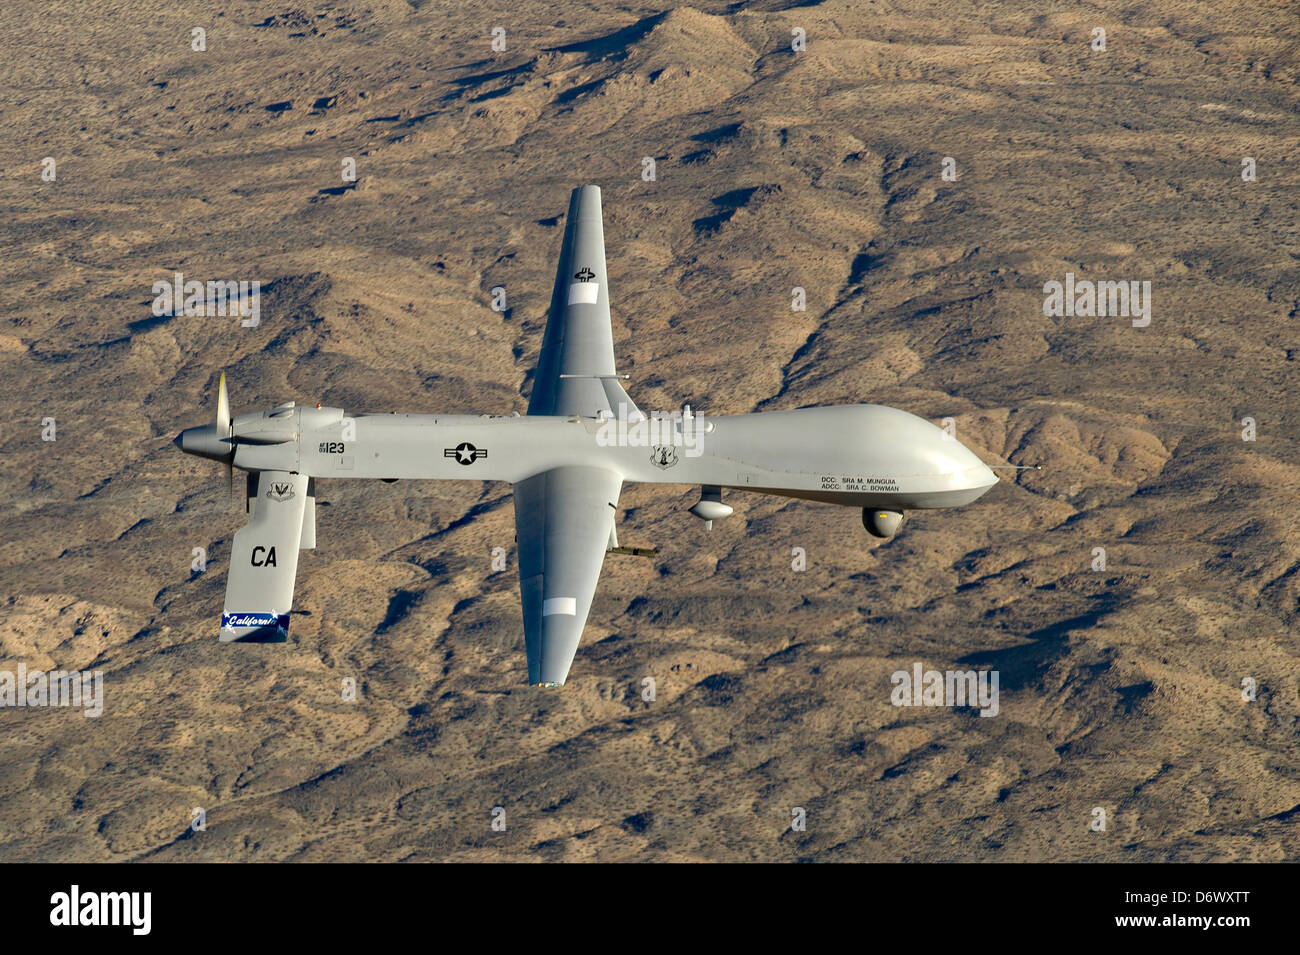 US Air Force MQ-1 Predator unmanned aerial vehicle assigned to the California Air National Guard's 163rd Reconnaissance Wing in flight over Southern California January 7, 2012 in Victorville, CA. Stock Photo